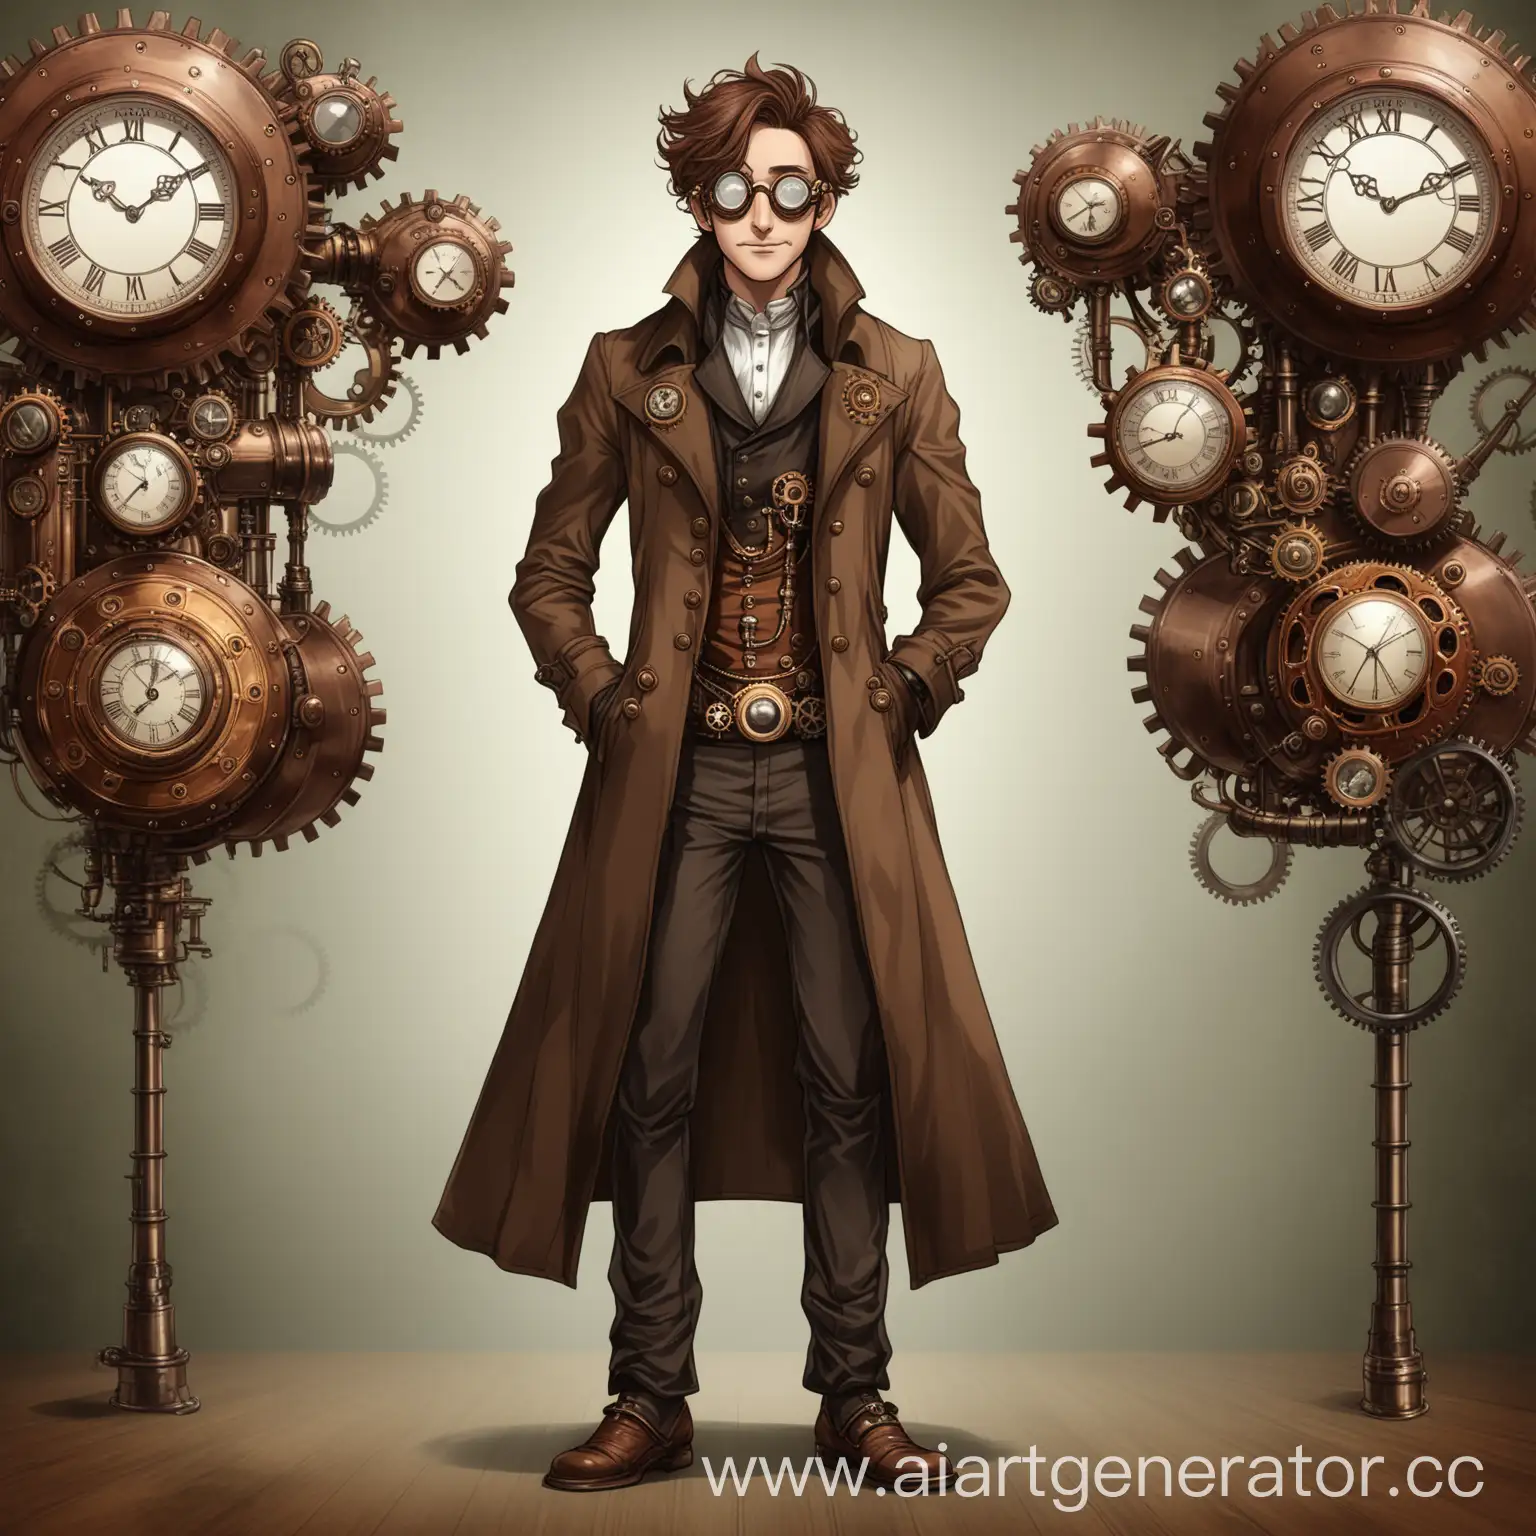 Man-with-Chestnut-Hair-Wearing-Steampunk-Glasses-and-Brown-Coat